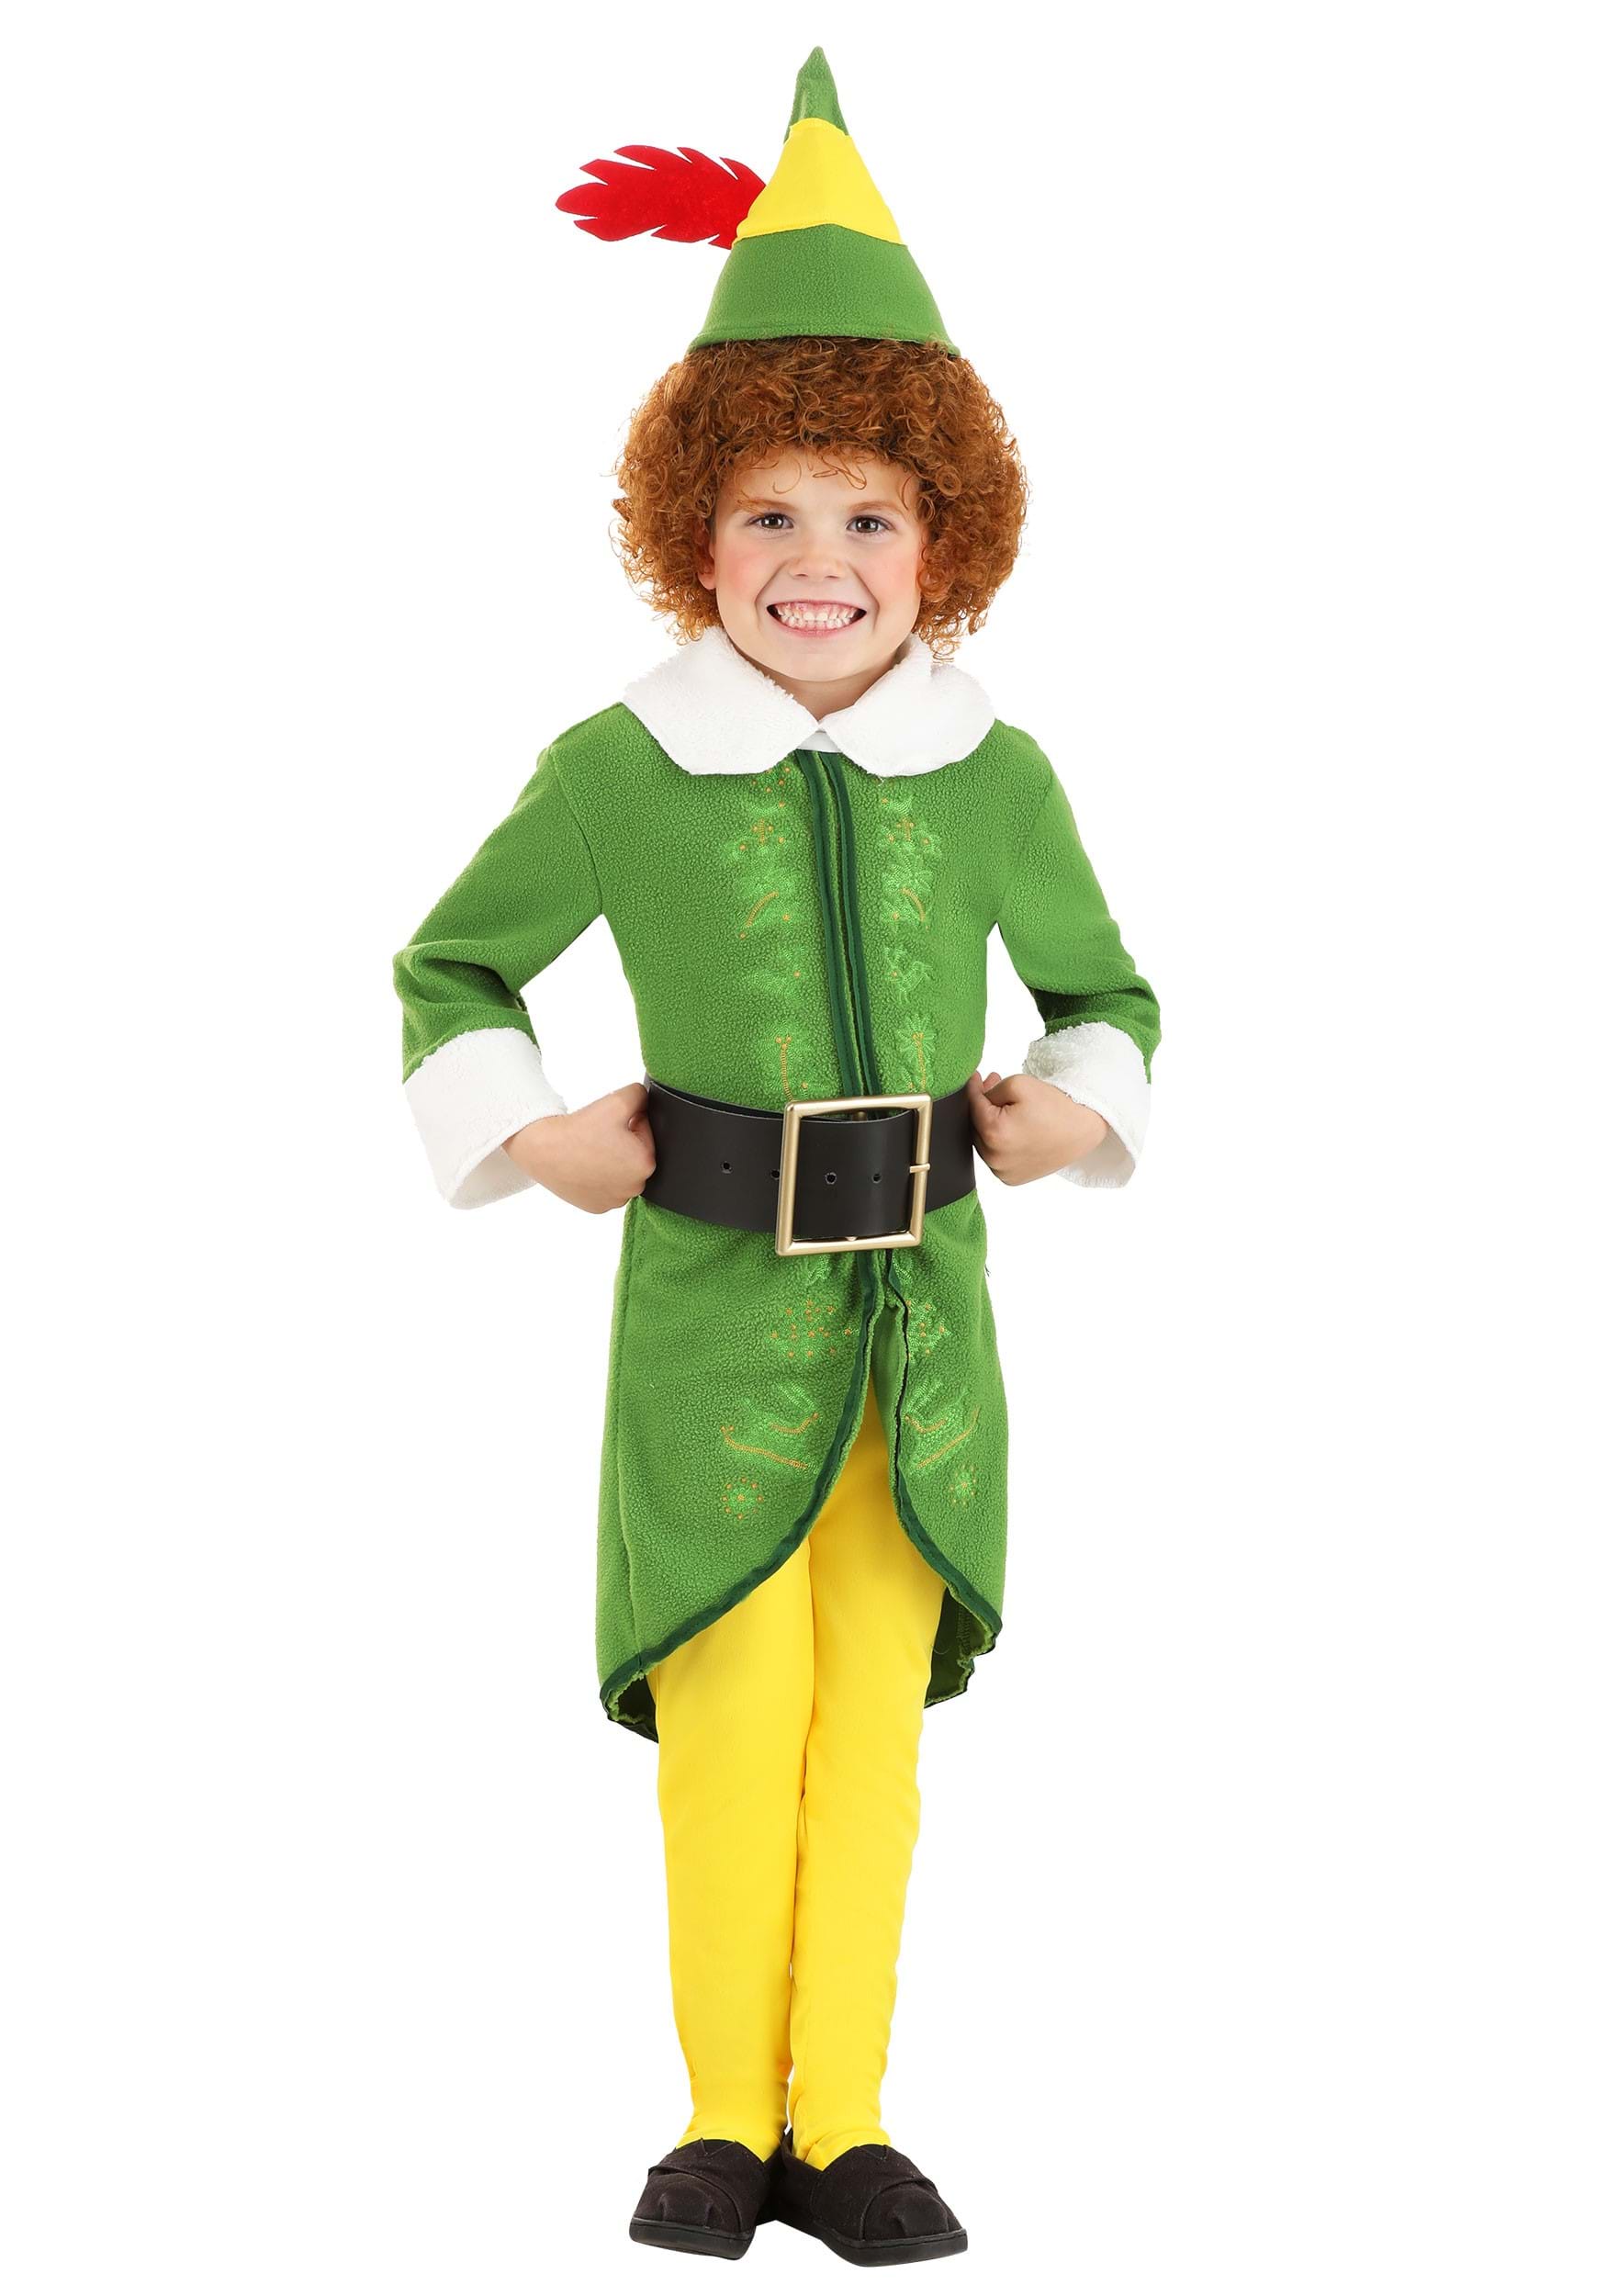  Fun Costumes Youth Holiday Elf Costume, Spread Joy and